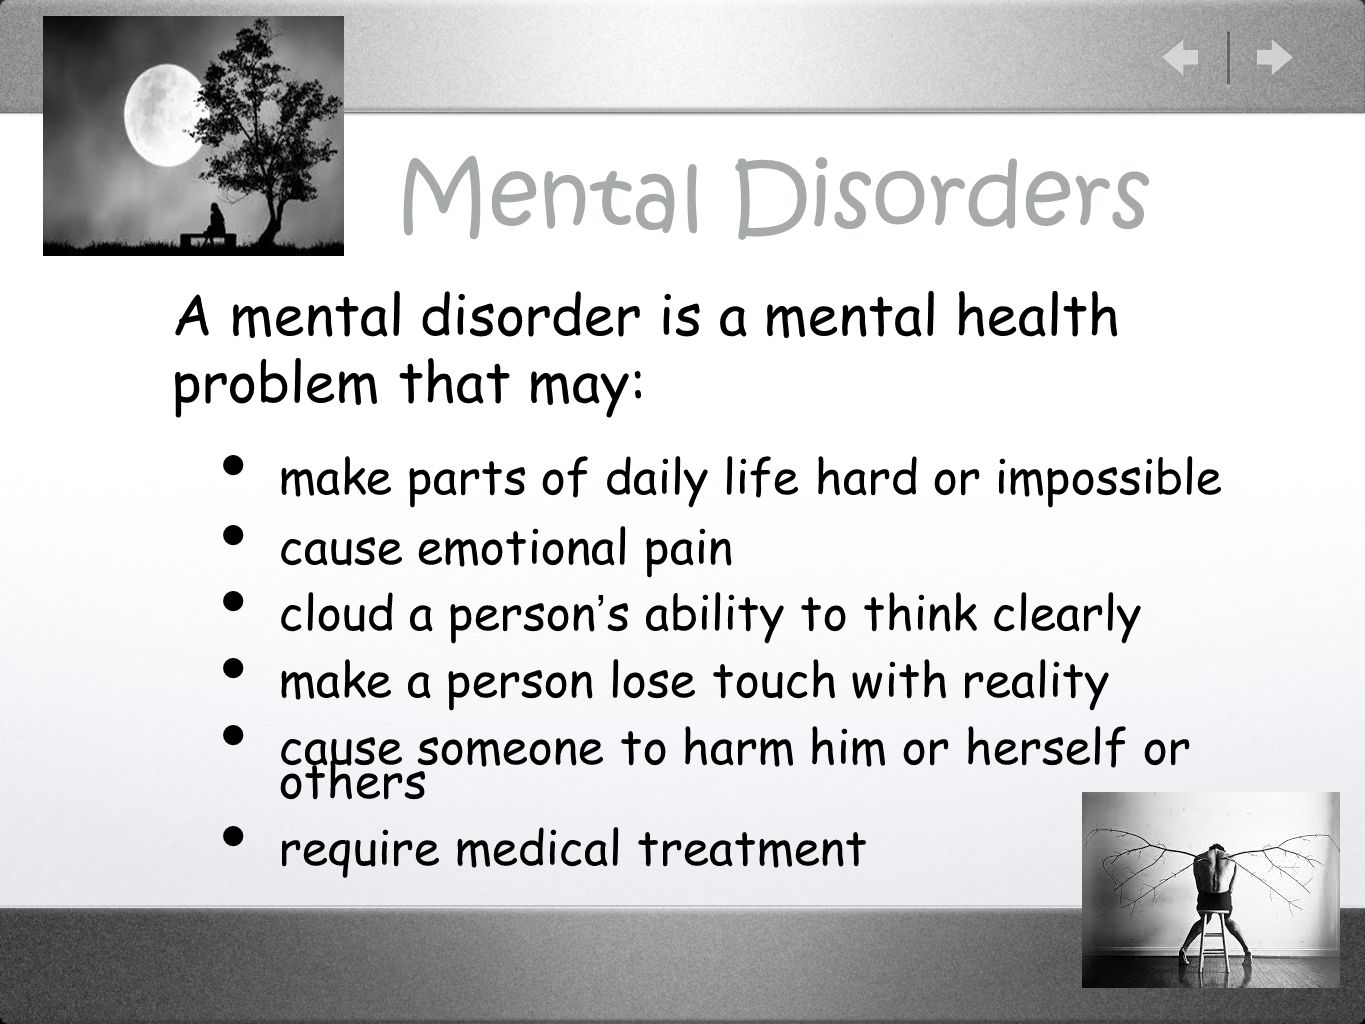 Mental Disorders A mental disorder is a mental health problem that may: make parts of daily life hard or impossible cause emotional pain cloud a person’s ability to think clearly make a person lose touch with reality cause someone to harm him or herself or others require medical treatment